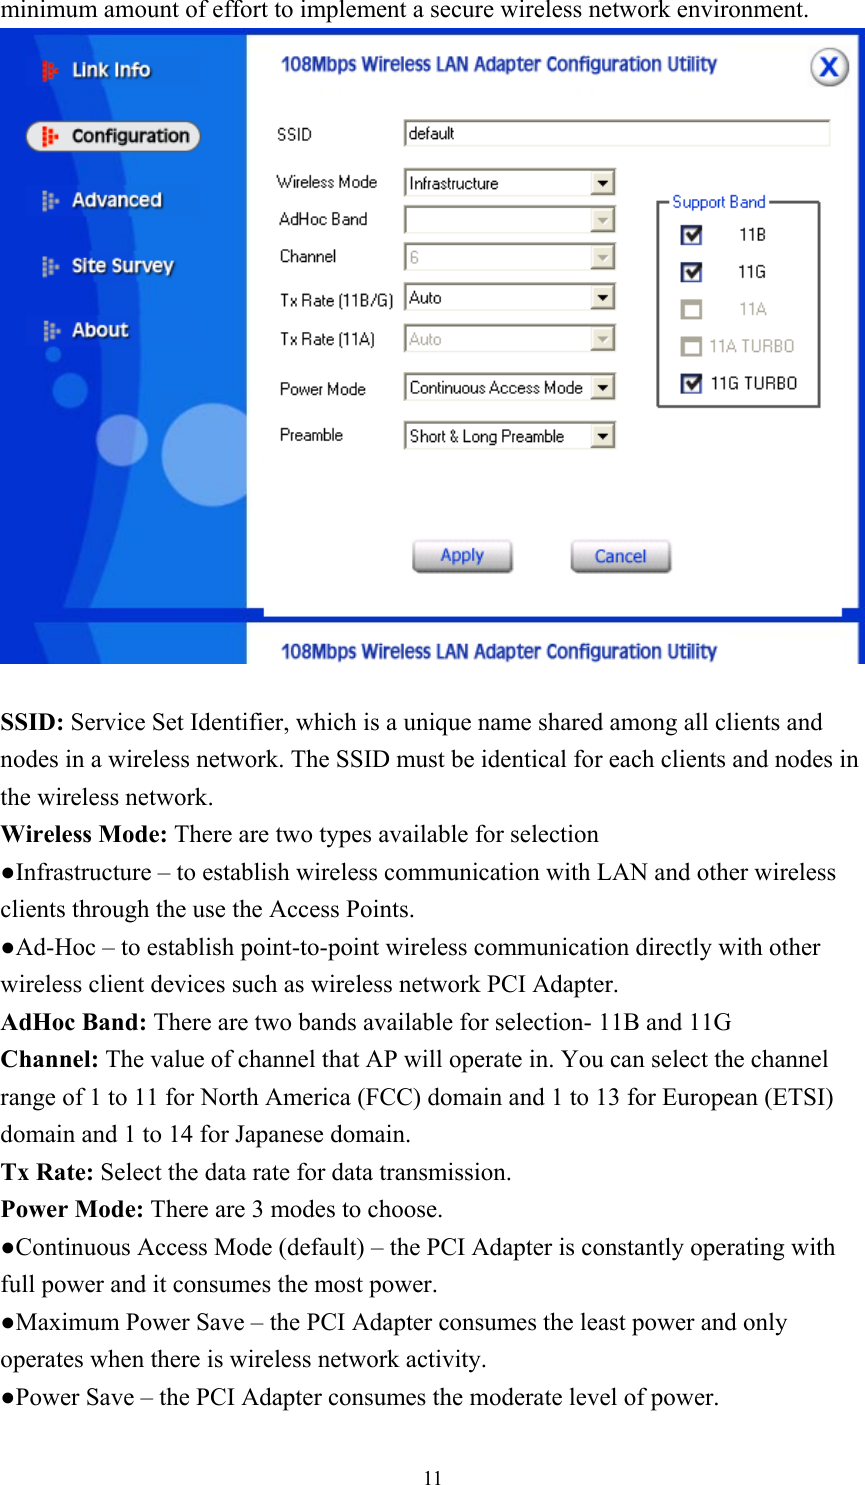  11minimum amount of effort to implement a secure wireless network environment.   SSID: Service Set Identifier, which is a unique name shared among all clients and nodes in a wireless network. The SSID must be identical for each clients and nodes in the wireless network. Wireless Mode: There are two types available for selection ●Infrastructure – to establish wireless communication with LAN and other wireless clients through the use the Access Points. ●Ad-Hoc – to establish point-to-point wireless communication directly with other wireless client devices such as wireless network PCI Adapter. AdHoc Band: There are two bands available for selection- 11B and 11G Channel: The value of channel that AP will operate in. You can select the channel range of 1 to 11 for North America (FCC) domain and 1 to 13 for European (ETSI) domain and 1 to 14 for Japanese domain. Tx Rate: Select the data rate for data transmission. Power Mode: There are 3 modes to choose. ●Continuous Access Mode (default) – the PCI Adapter is constantly operating with full power and it consumes the most power. ●Maximum Power Save – the PCI Adapter consumes the least power and only operates when there is wireless network activity. ●Power Save – the PCI Adapter consumes the moderate level of power. 